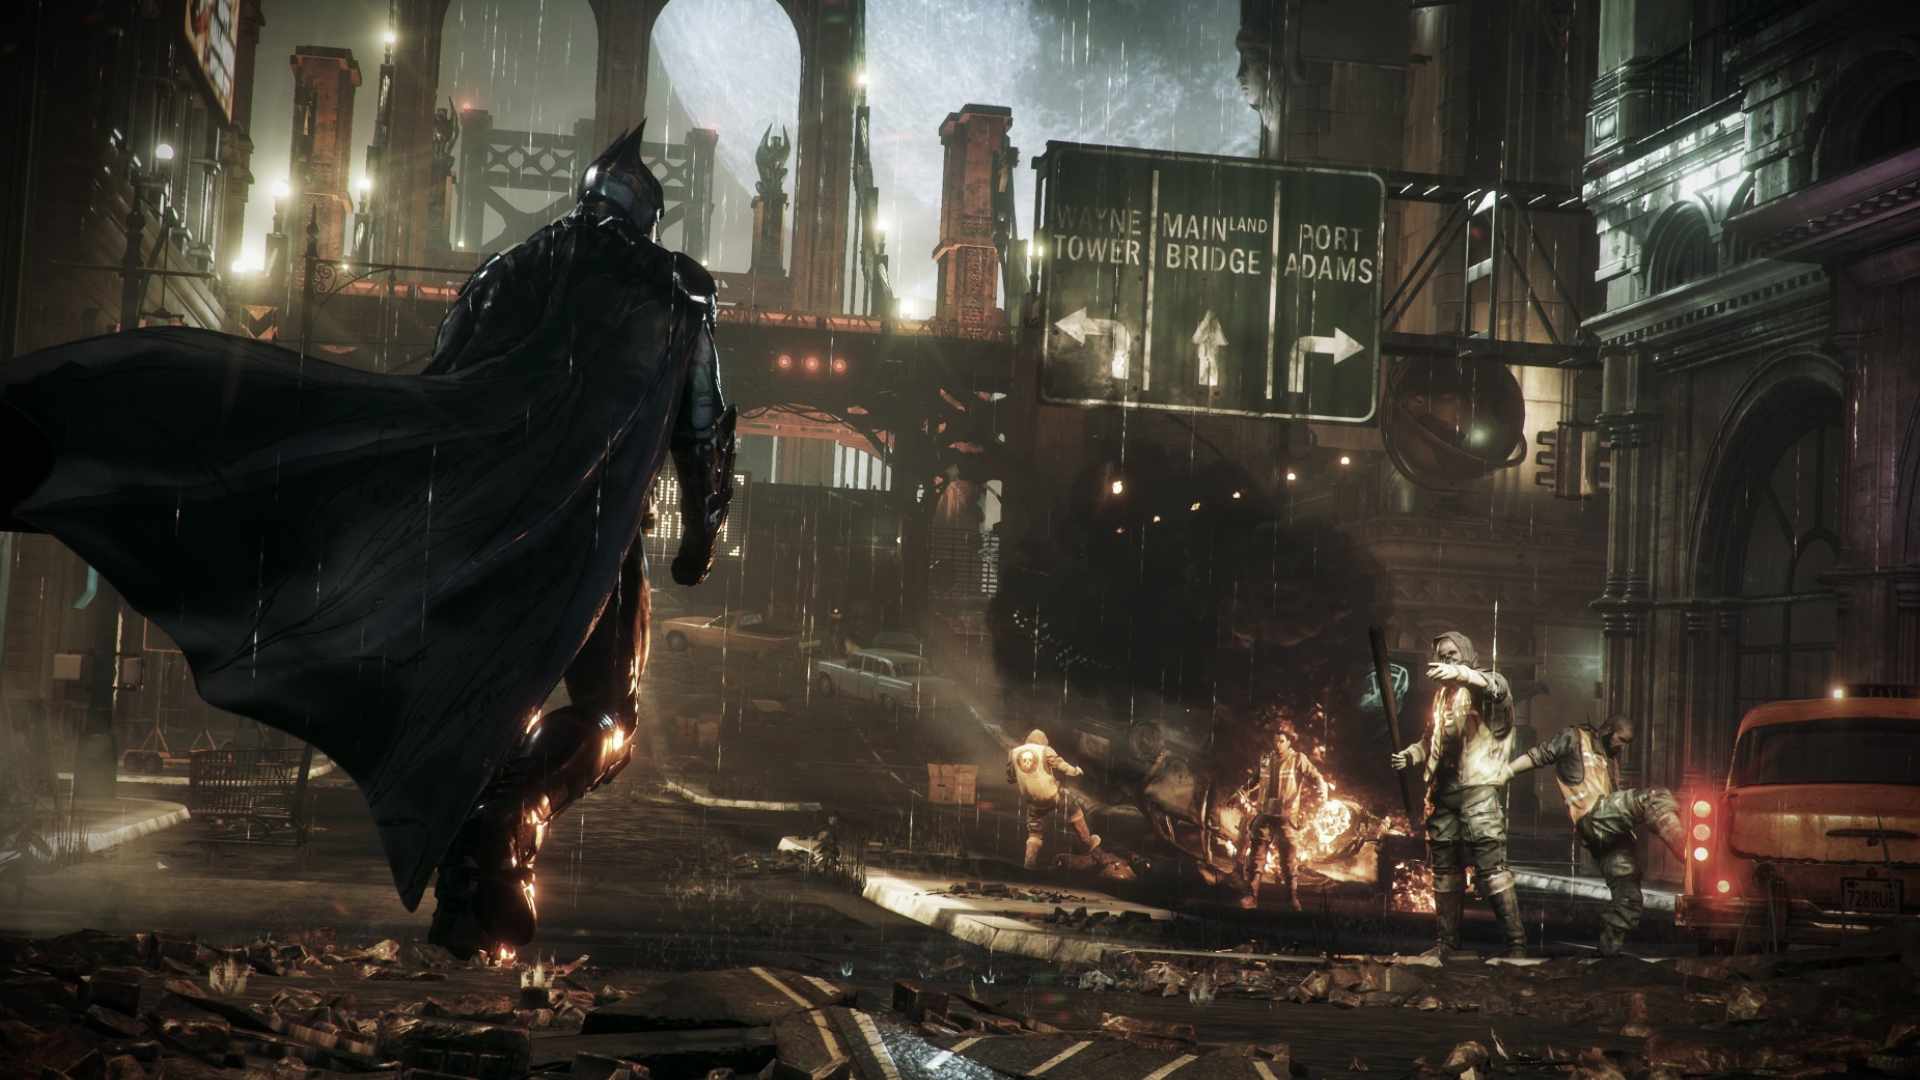 Arkham Knight was ahead of its time in terms of visuals